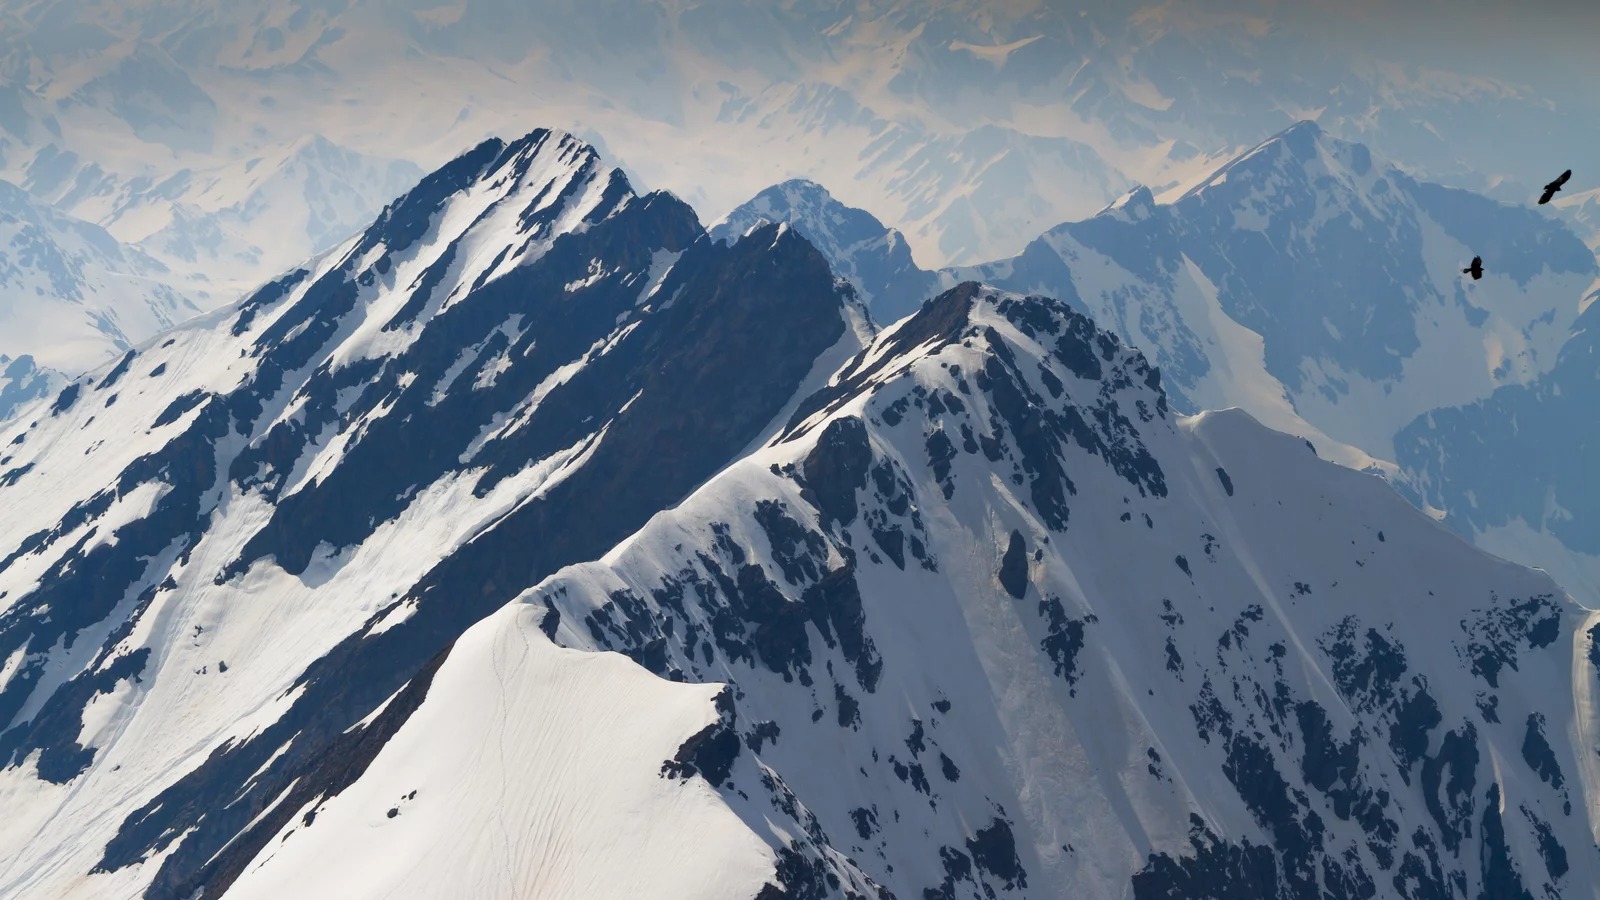 Only Actual Geography Geniuses Can Score 16 on This Quiz Pyrenees mountain range